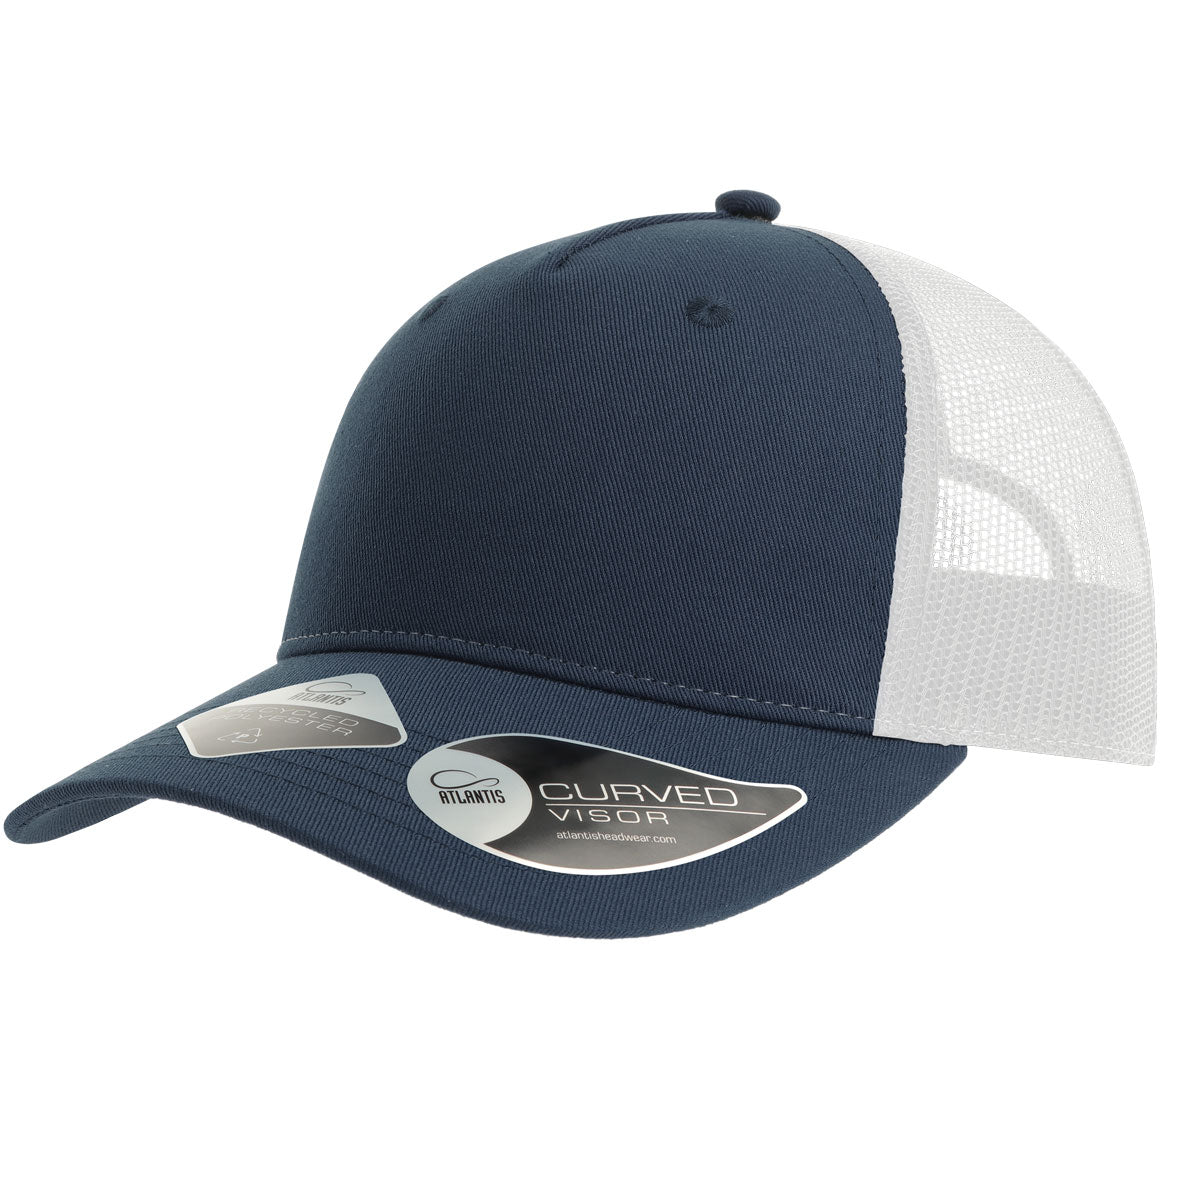 Customizable recycled polyester Atlantis truck hat in navy and white.